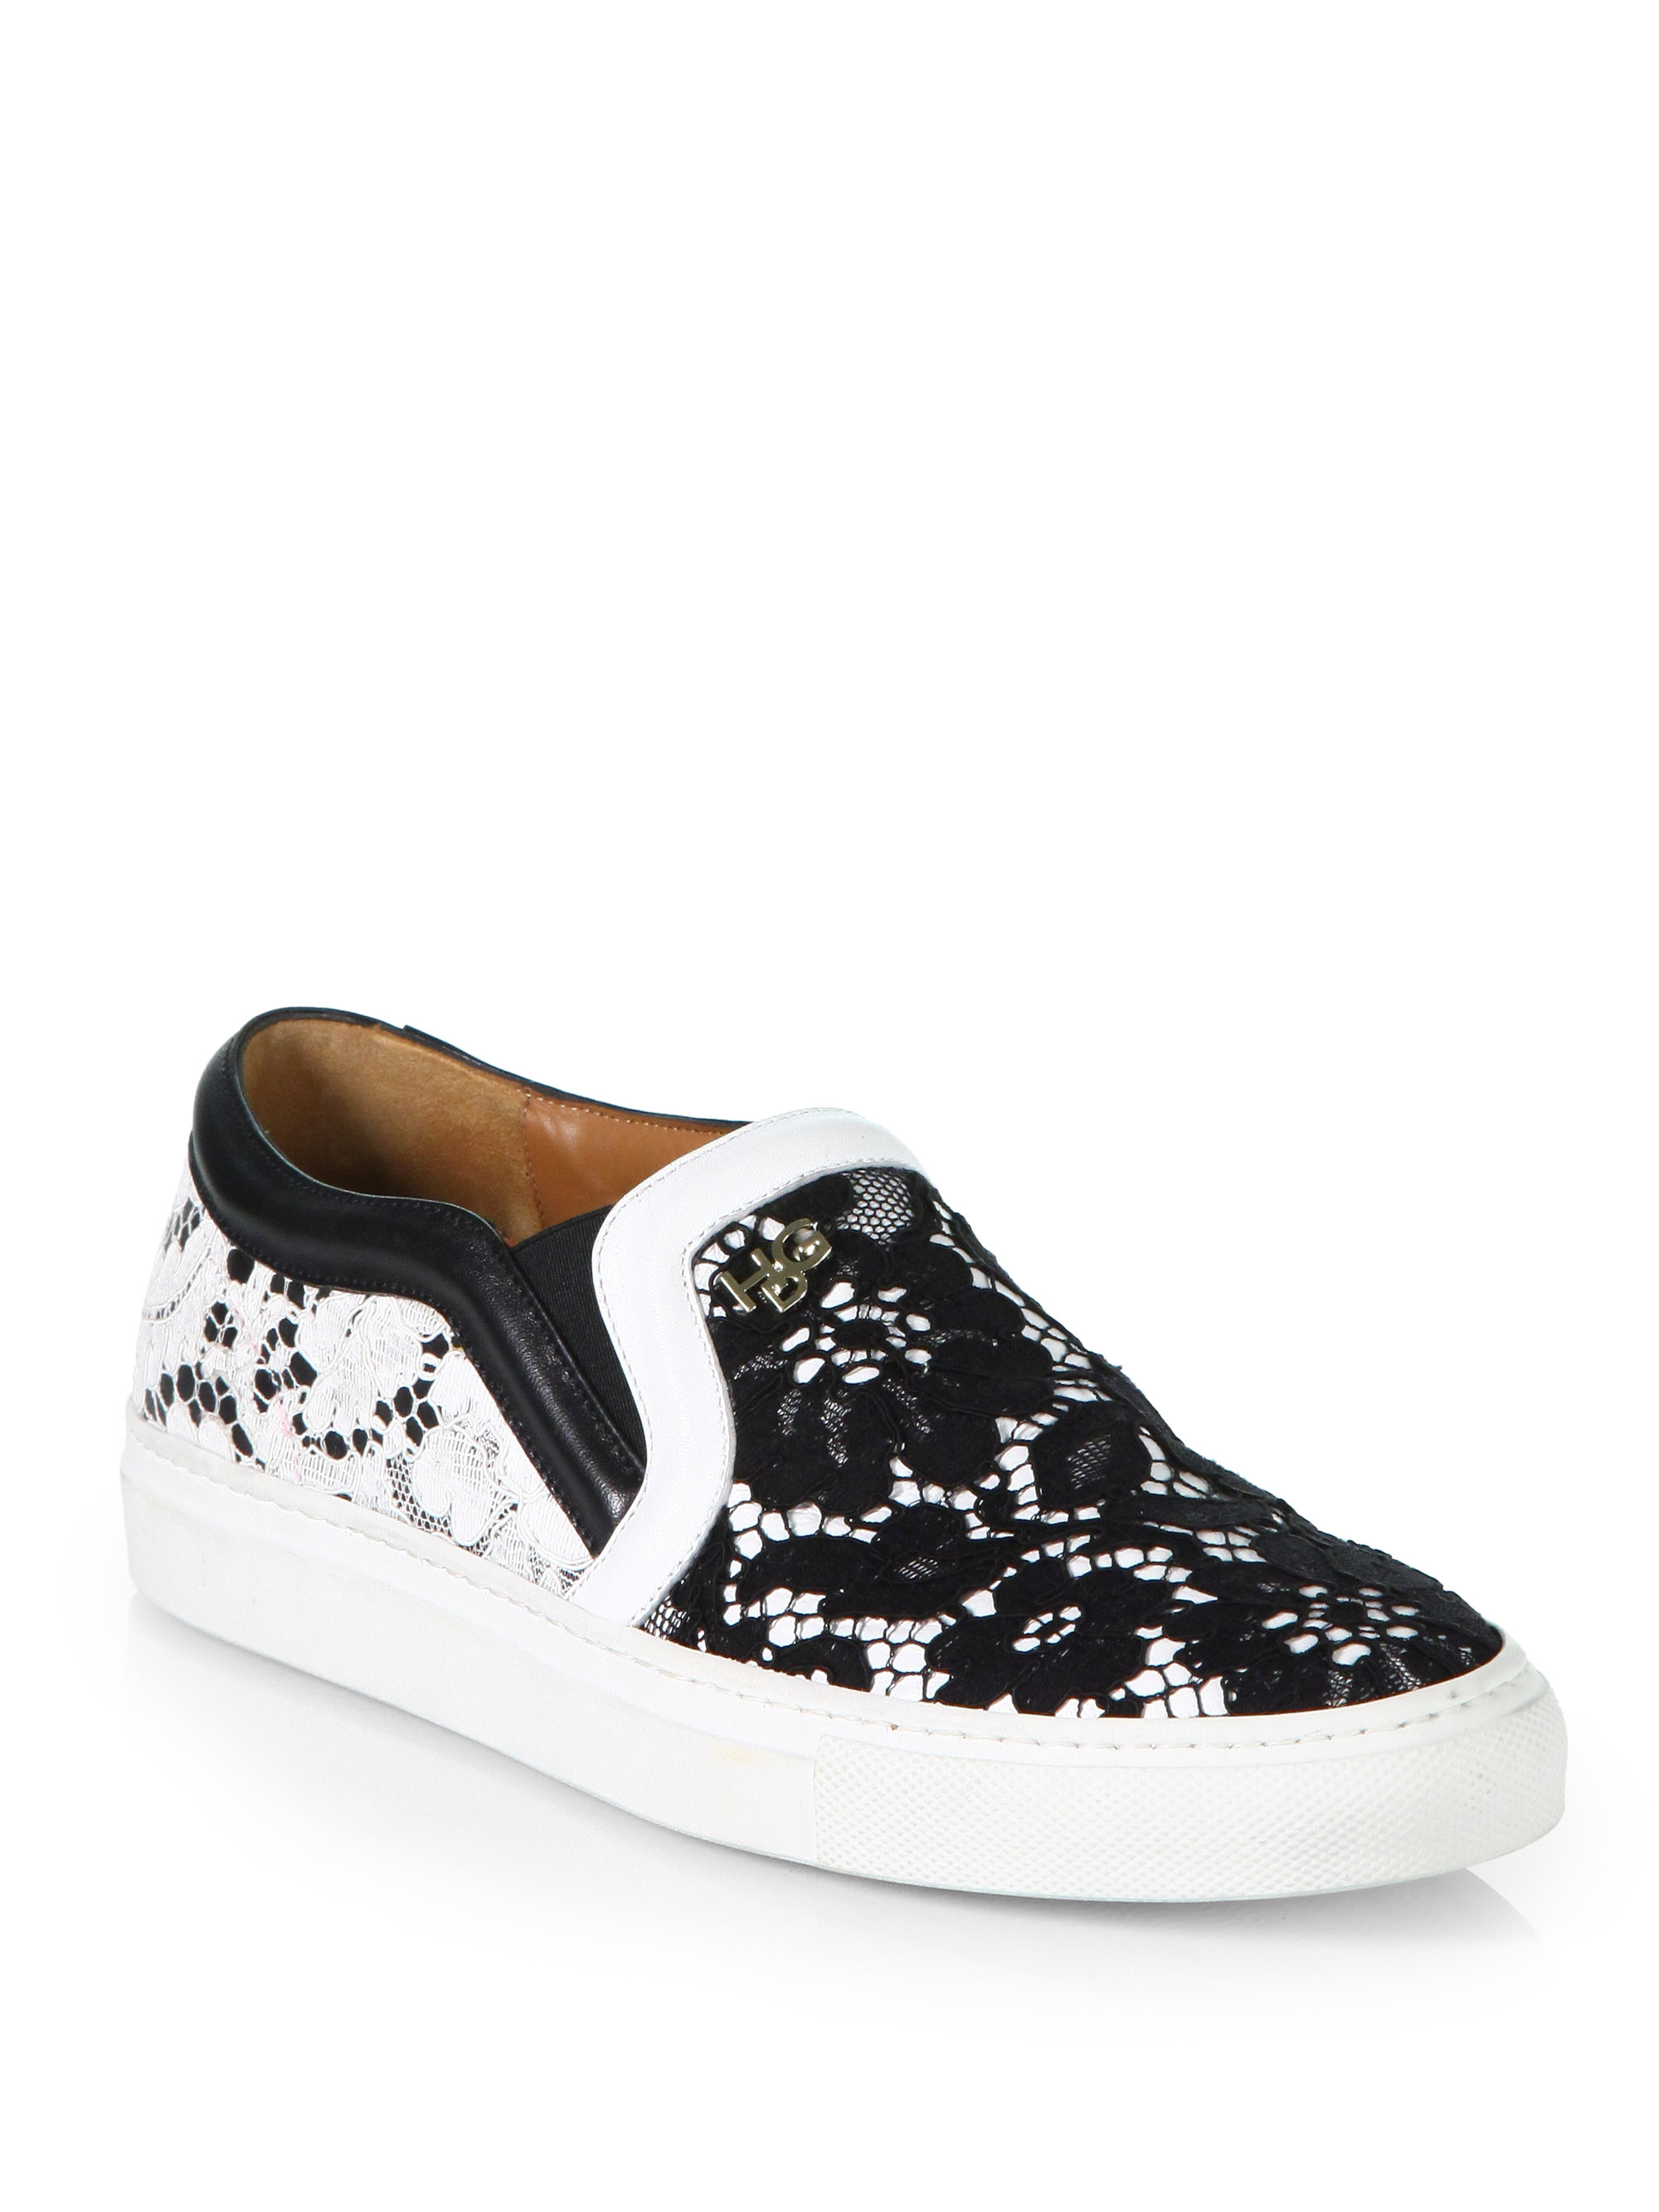 givenchy vans shoes